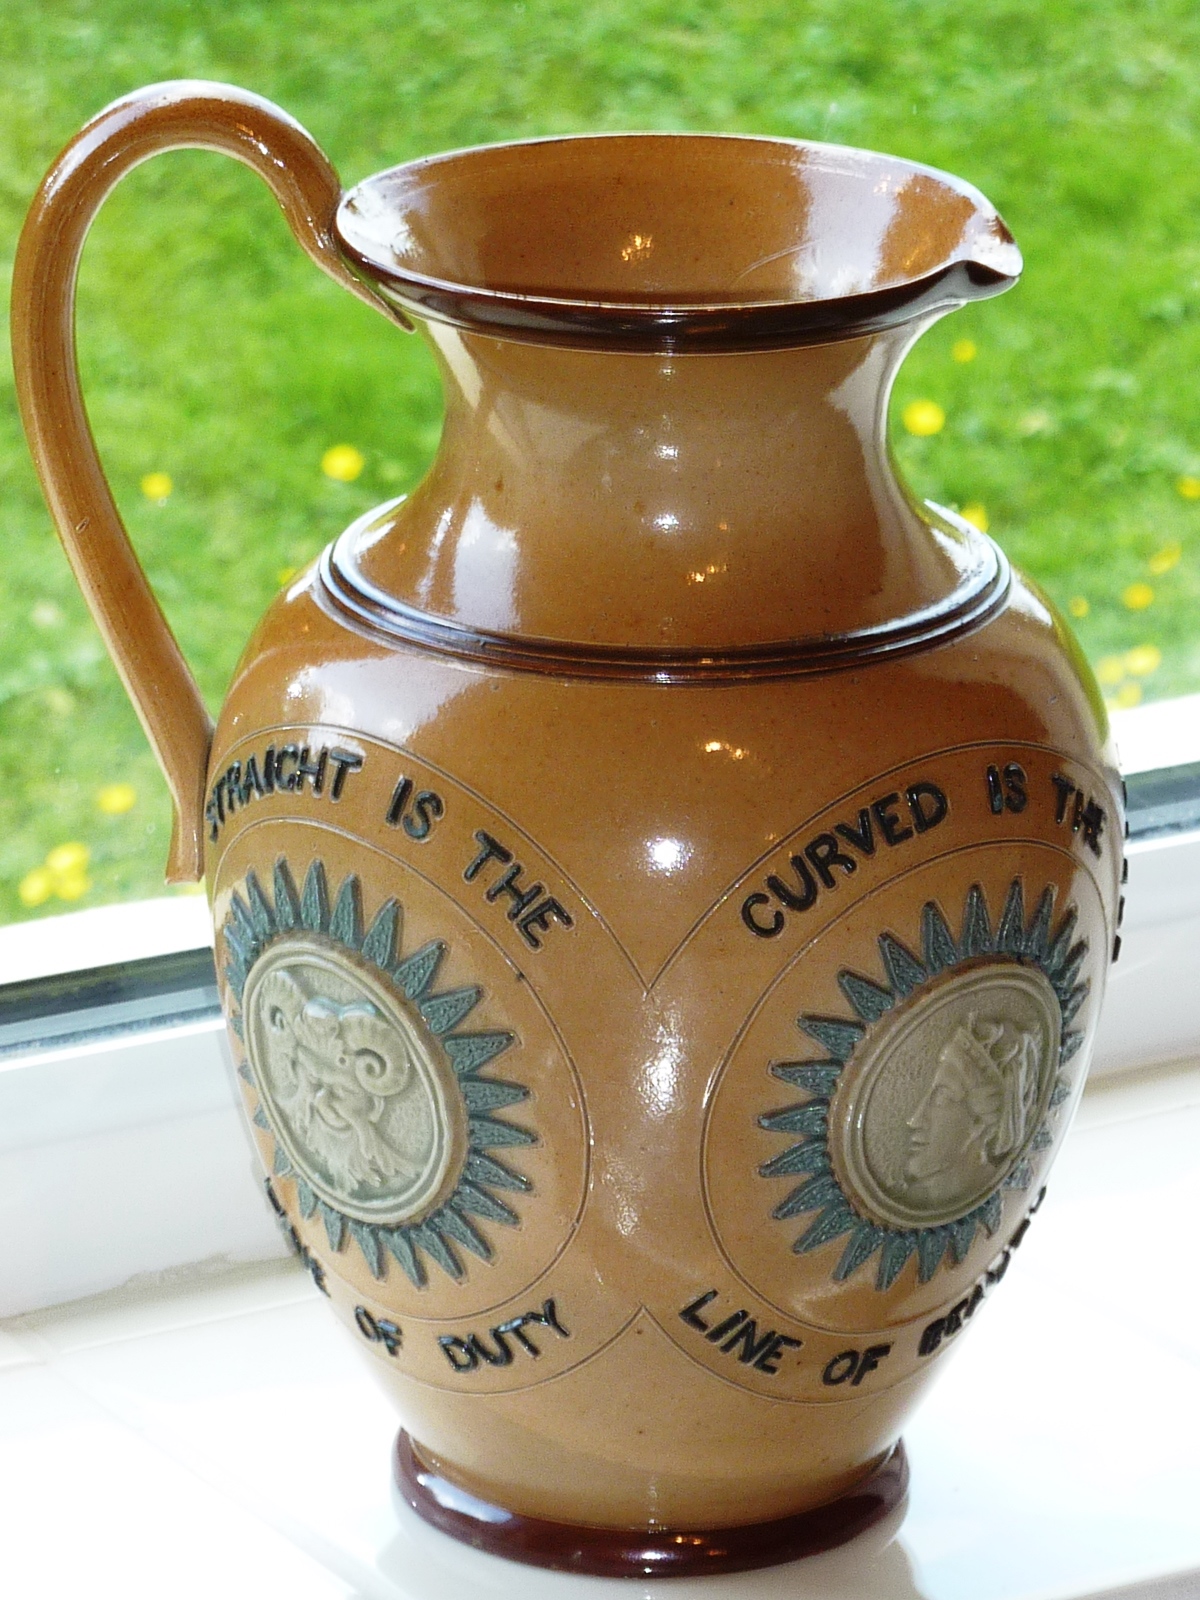 A Doulton Lambeth salt glaze stoneware Jug with applied mask roundel appliques and various